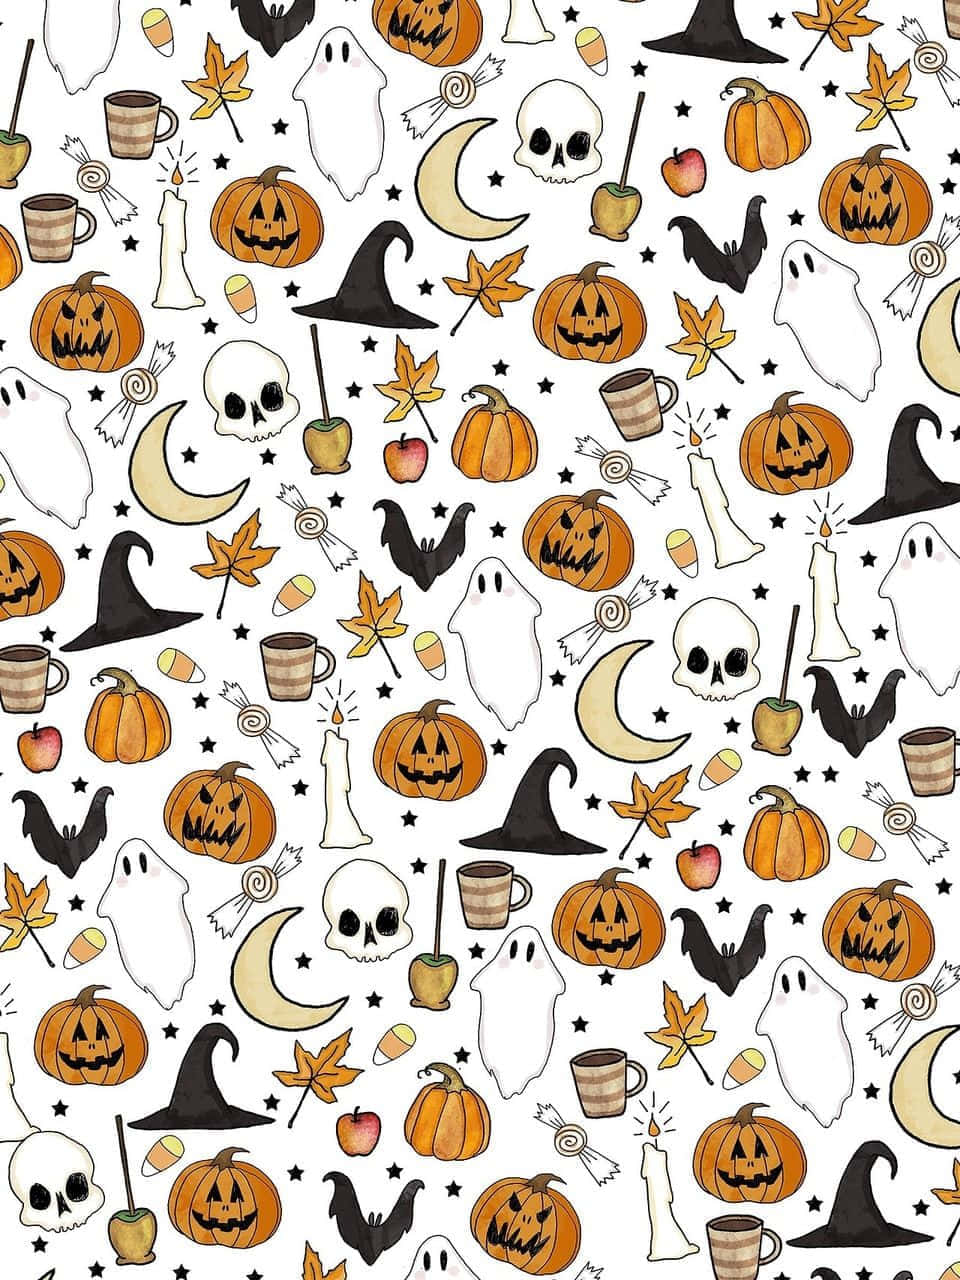 halloween pattern with pumpkins, ghosts and other halloween items